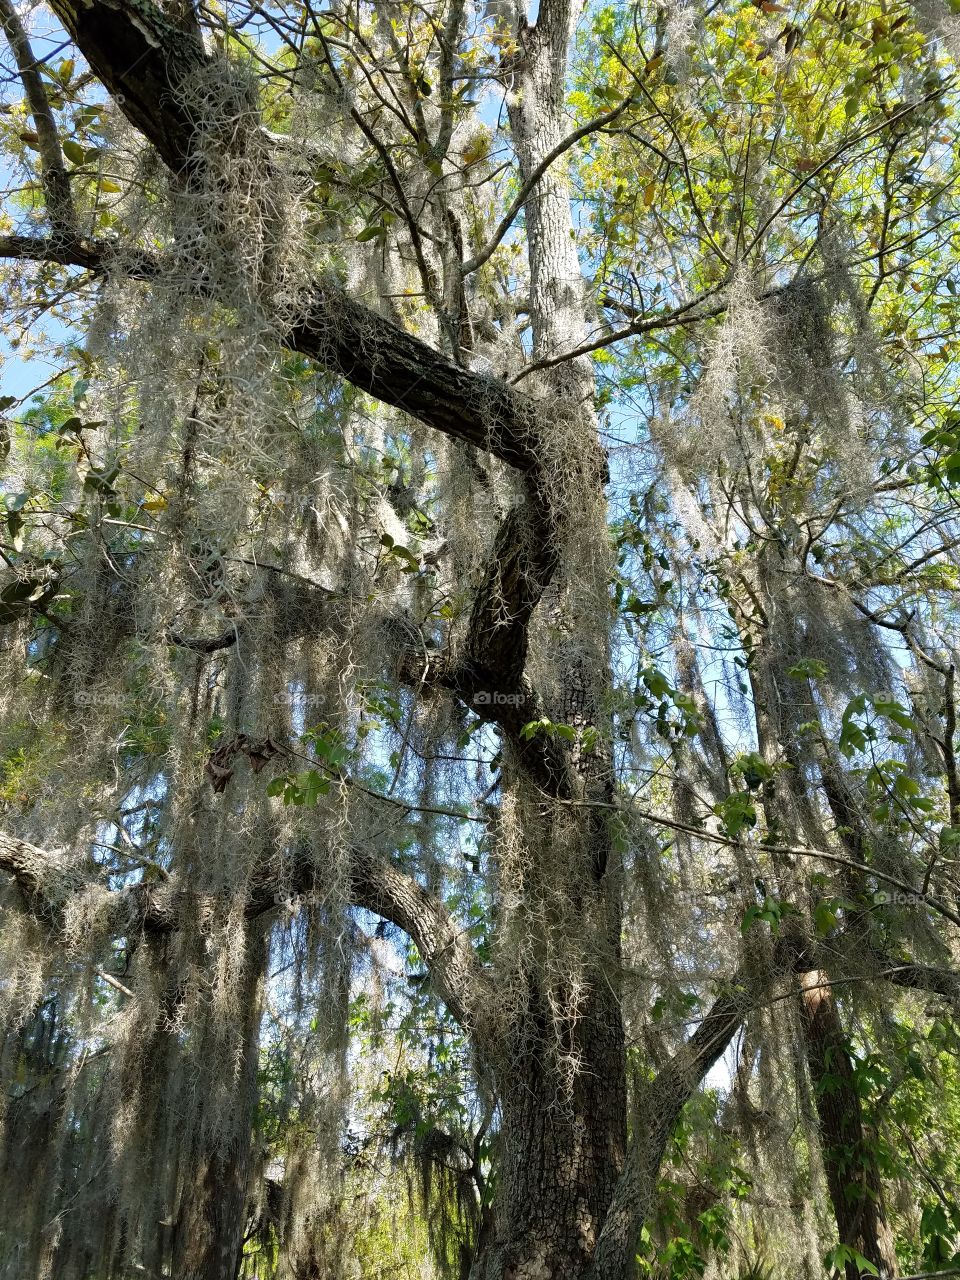 Mossy tree hanging over the swamp